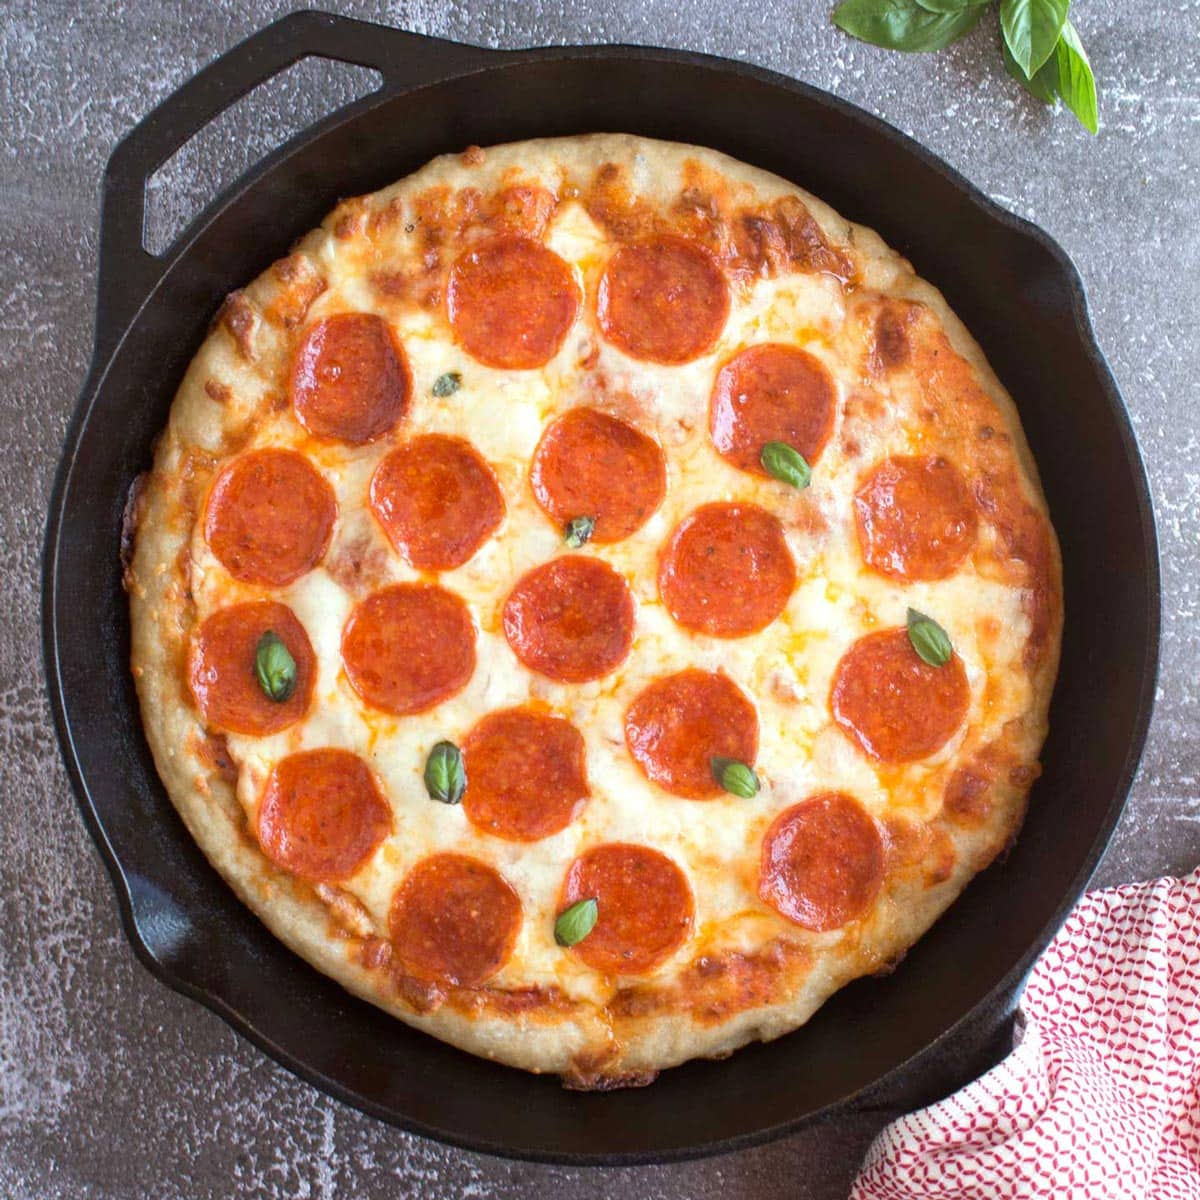 Cast iron skillet with pepperoni and cheese pizza. 